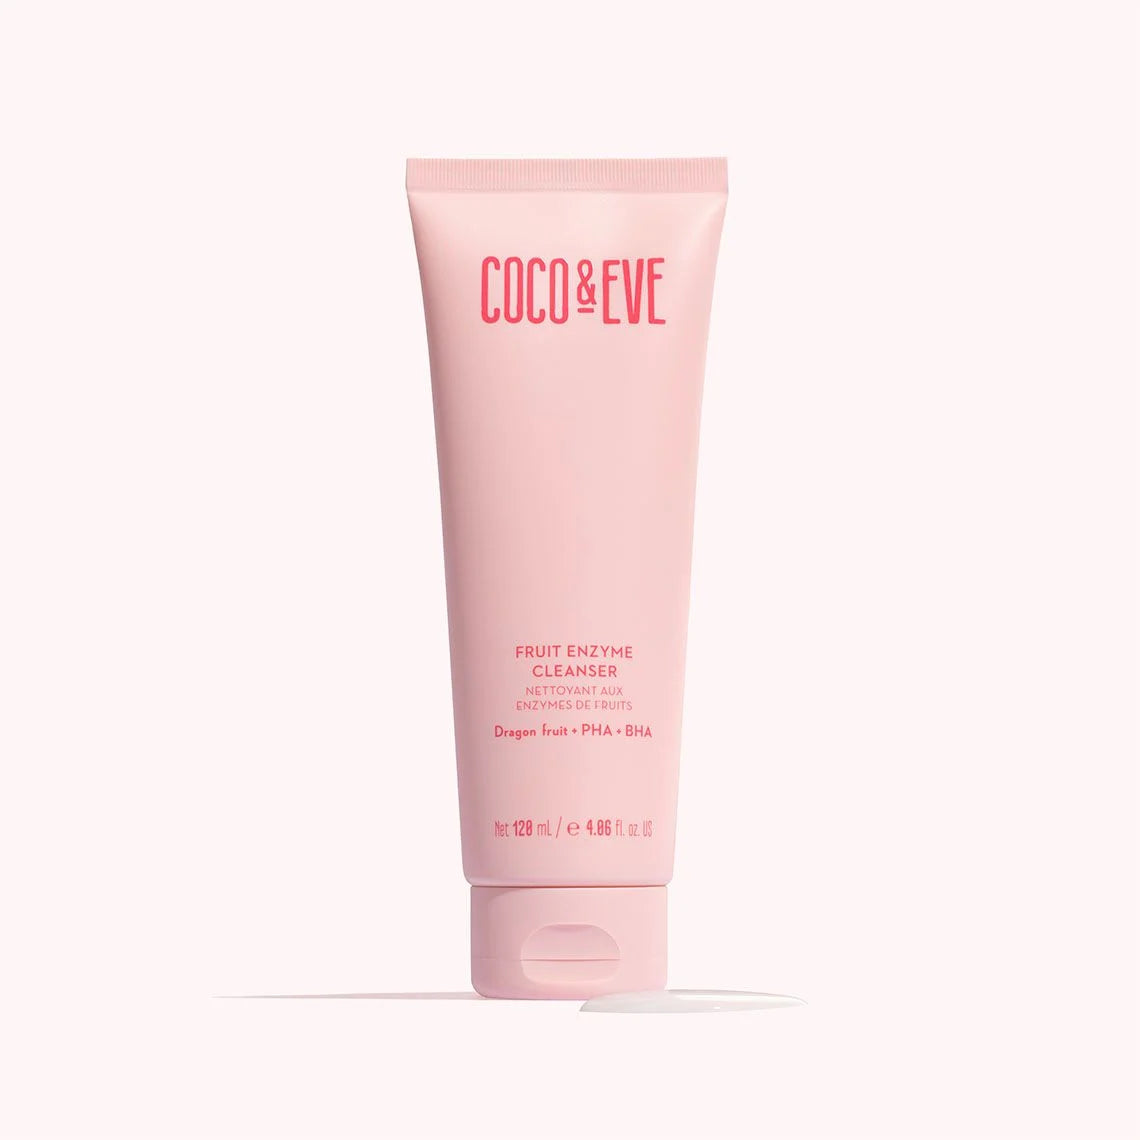 Coco & Eve Fruit Enzyme Cleanser - 120ml